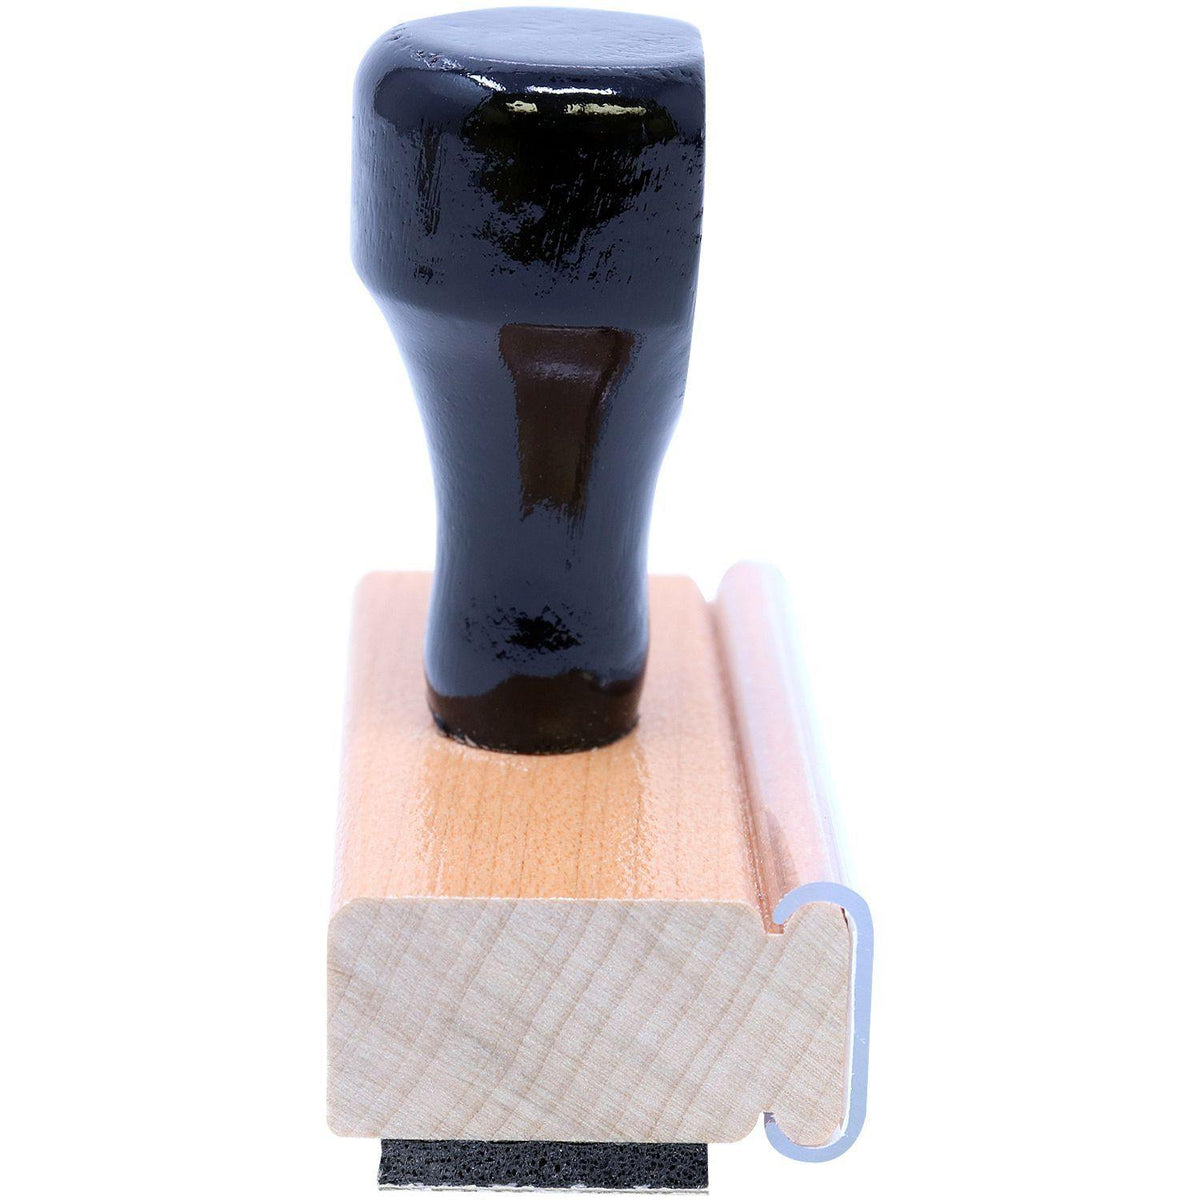 Outline Paid Rubber Stamp - Engineer Seal Stamps - Brand_Acorn, Impression Size_Small, Stamp Type_Regular Stamp, Type of Use_Finance, Type of Use_General